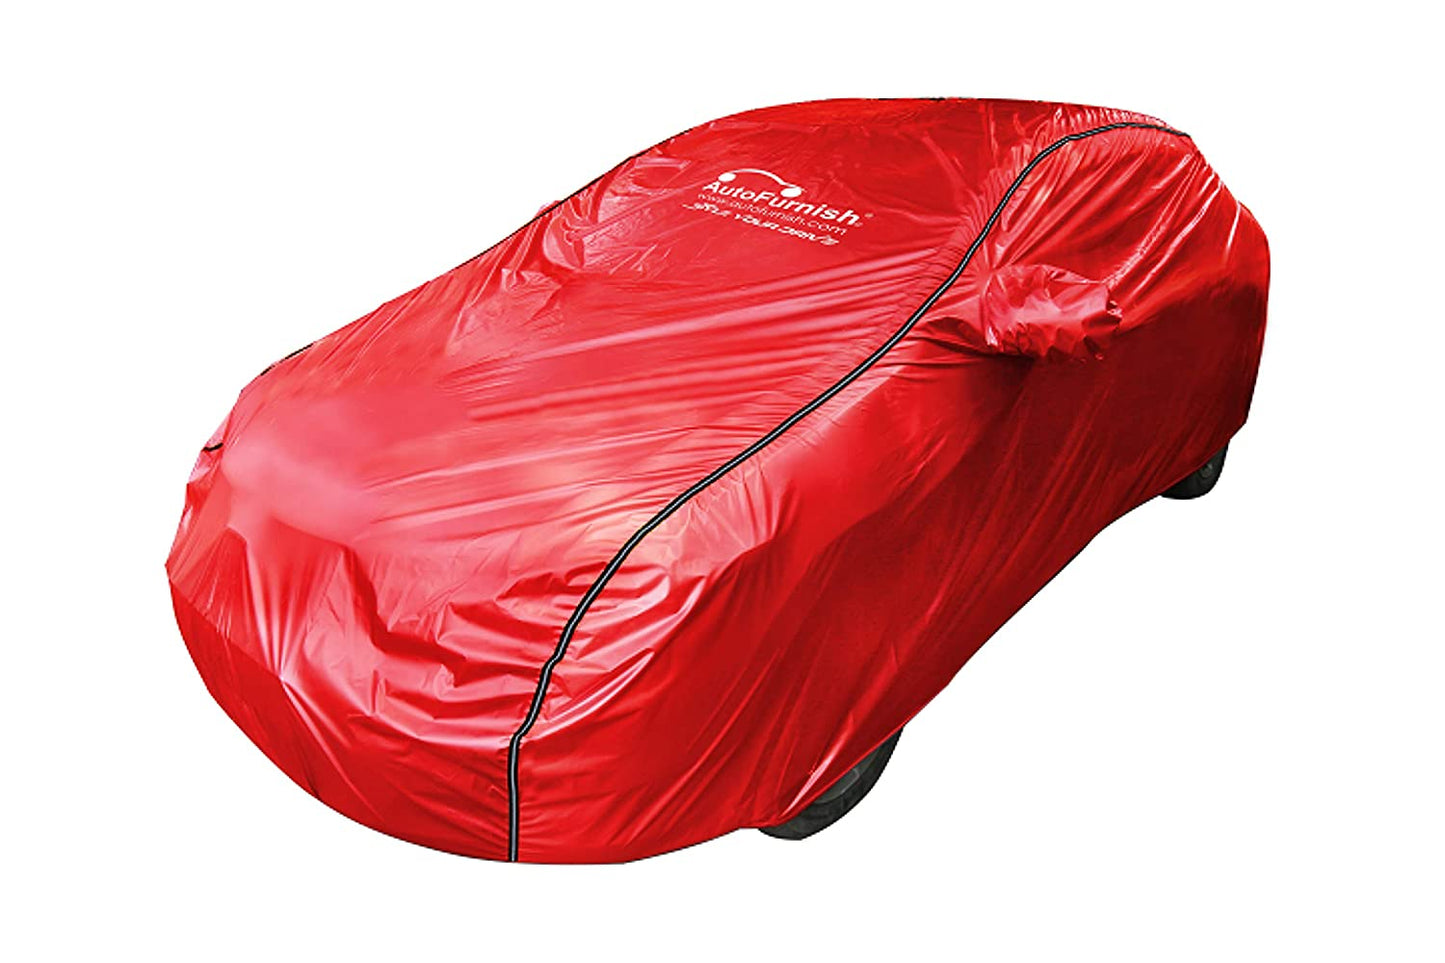 Jaguar XE 2018 Waterproof Car Cover, All Weather Proof, Premium & Long Lasting Fabric with Side Mirror Pocket (ACHO Series)